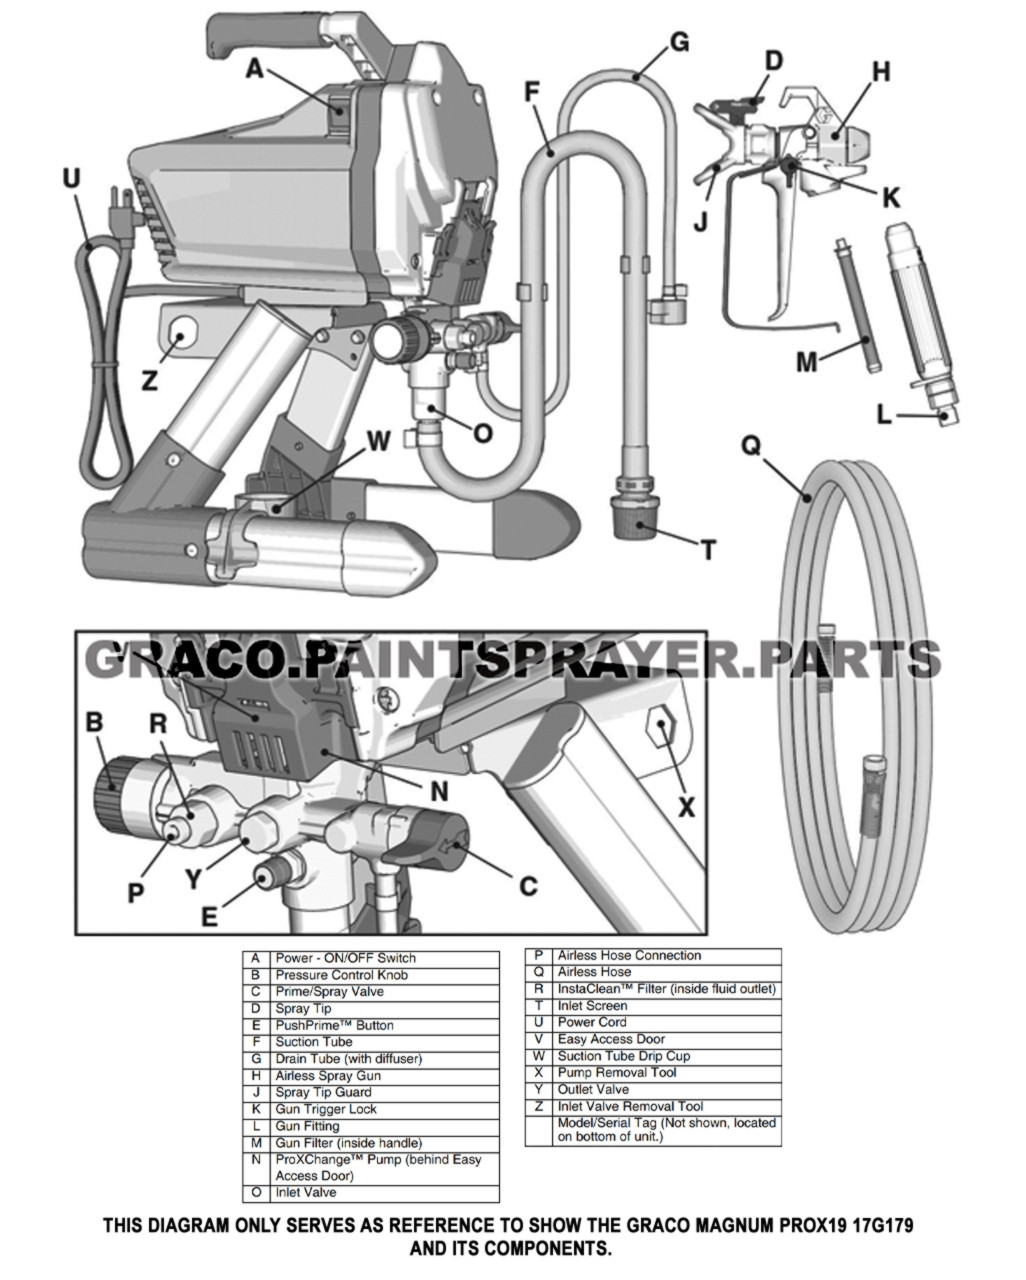 Graco Paint Sprayer Parts & Accessories at